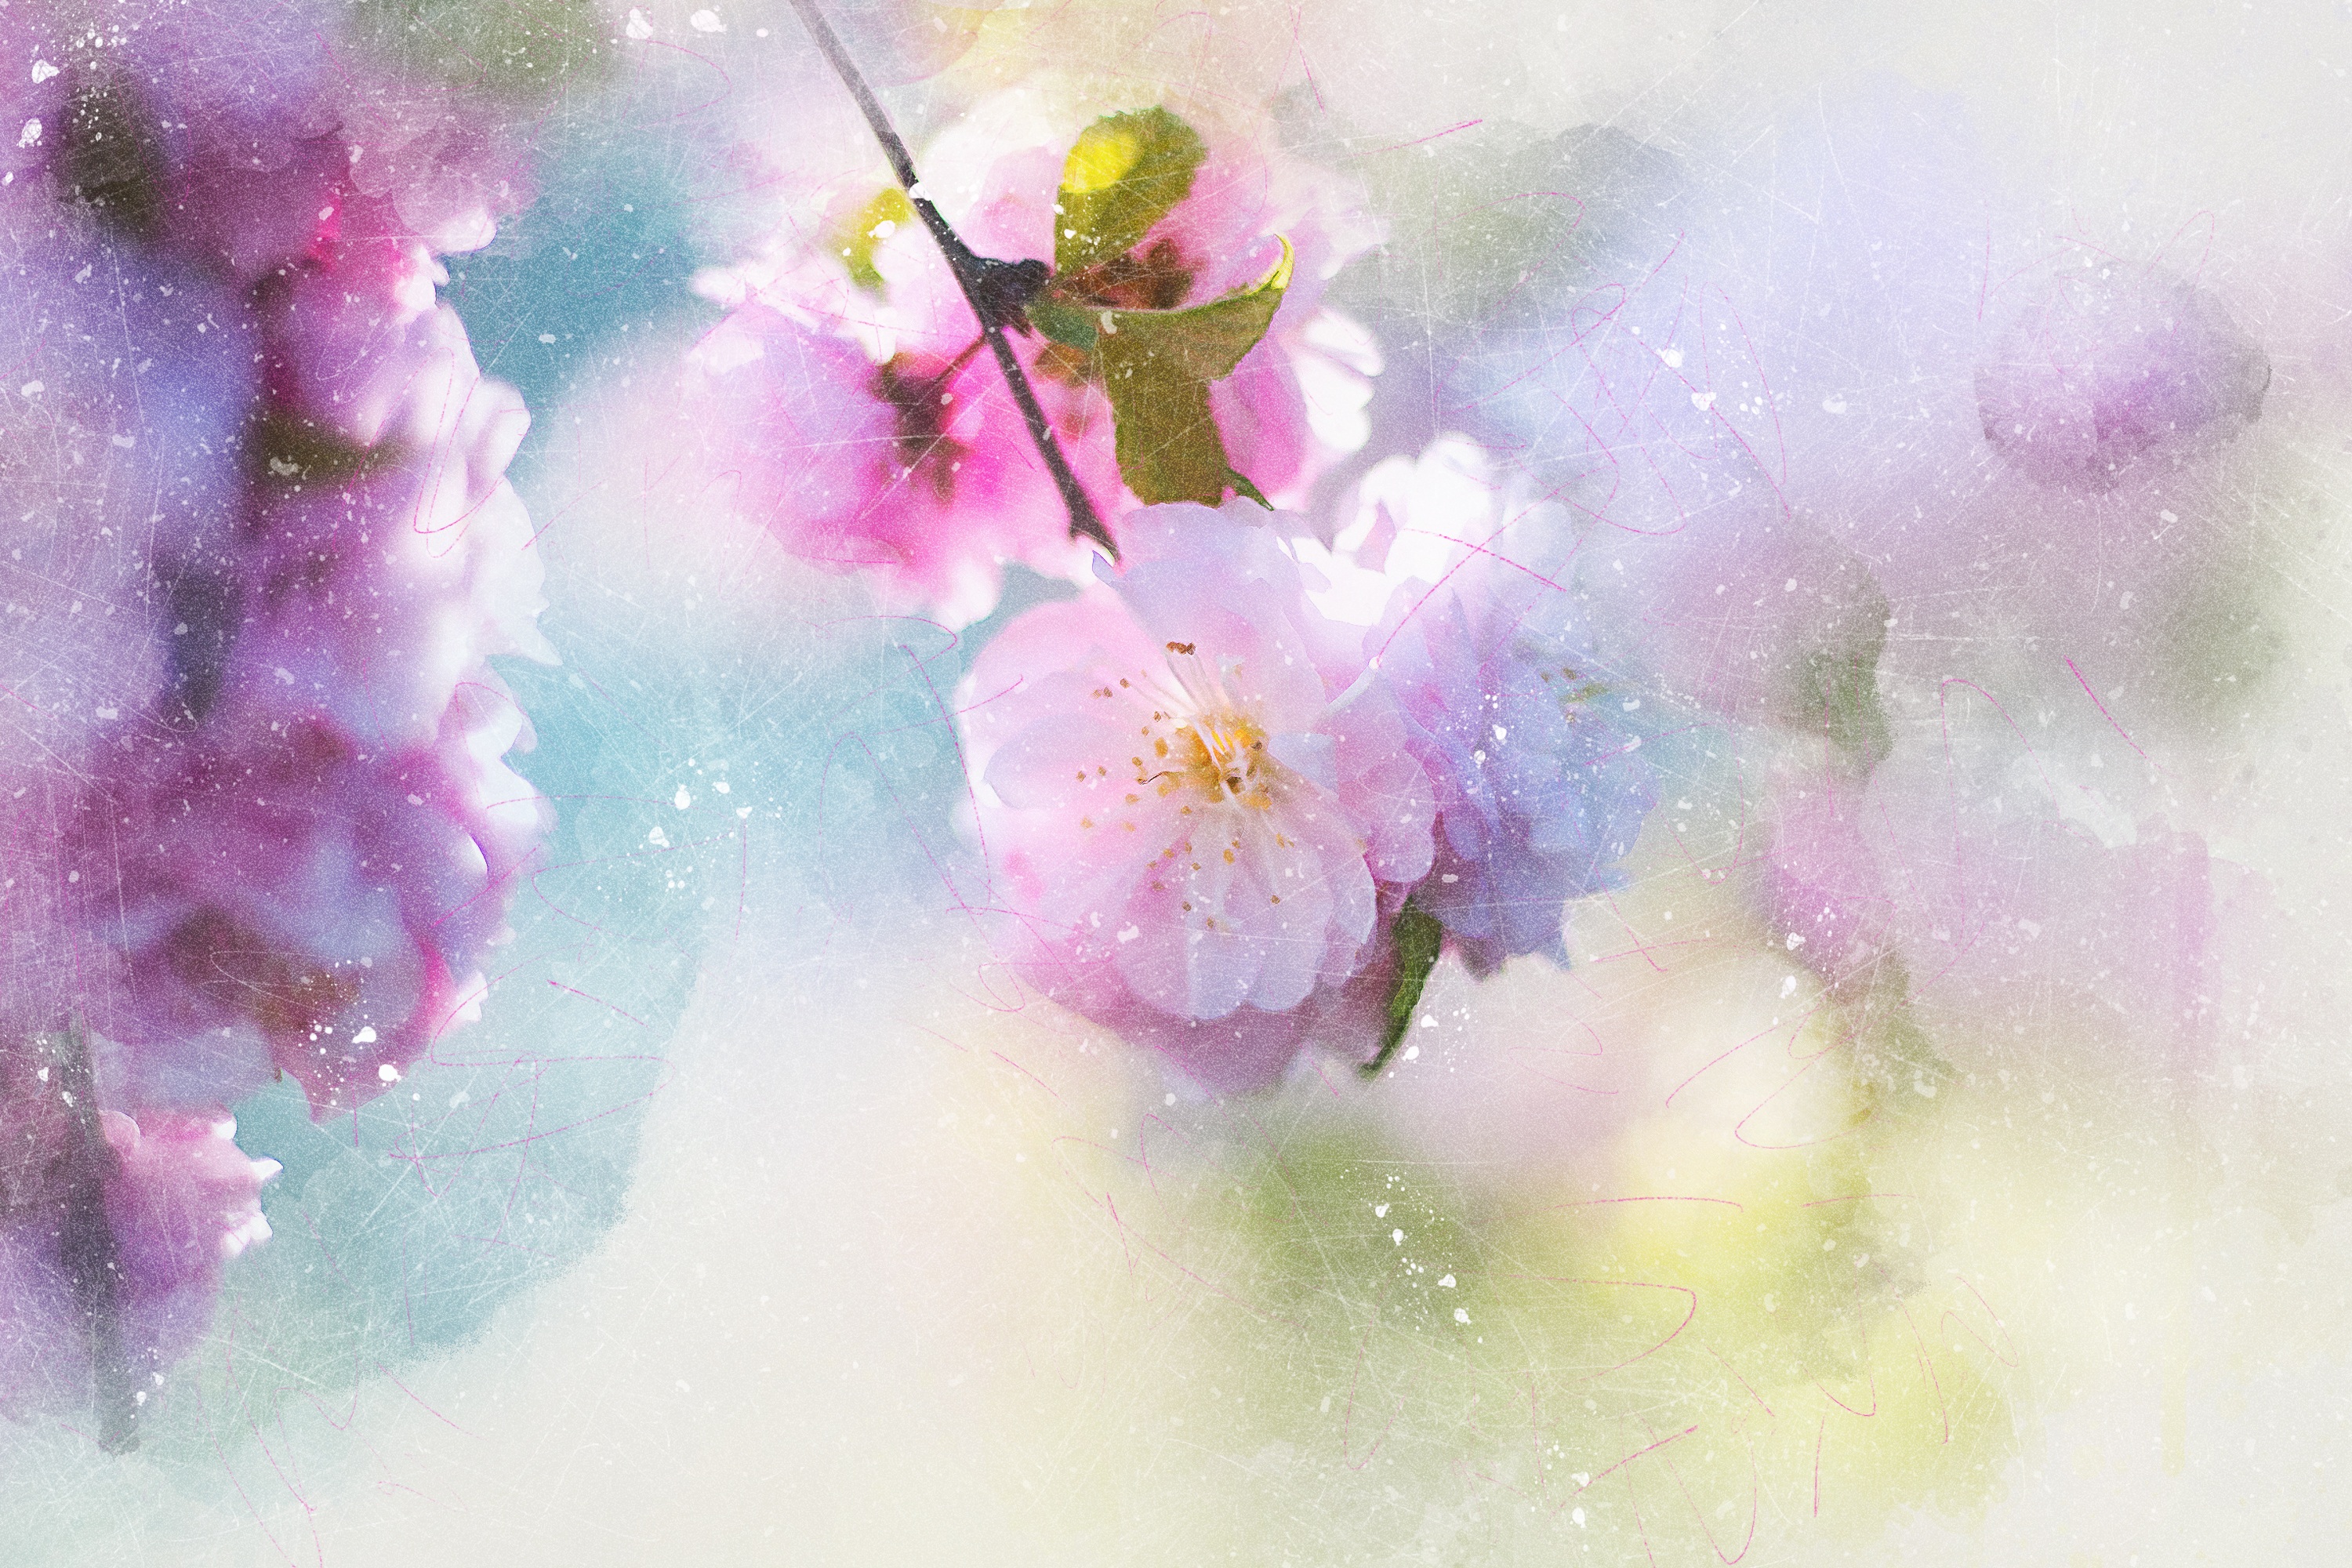 Artistic Cherry blossom by ractapopulous